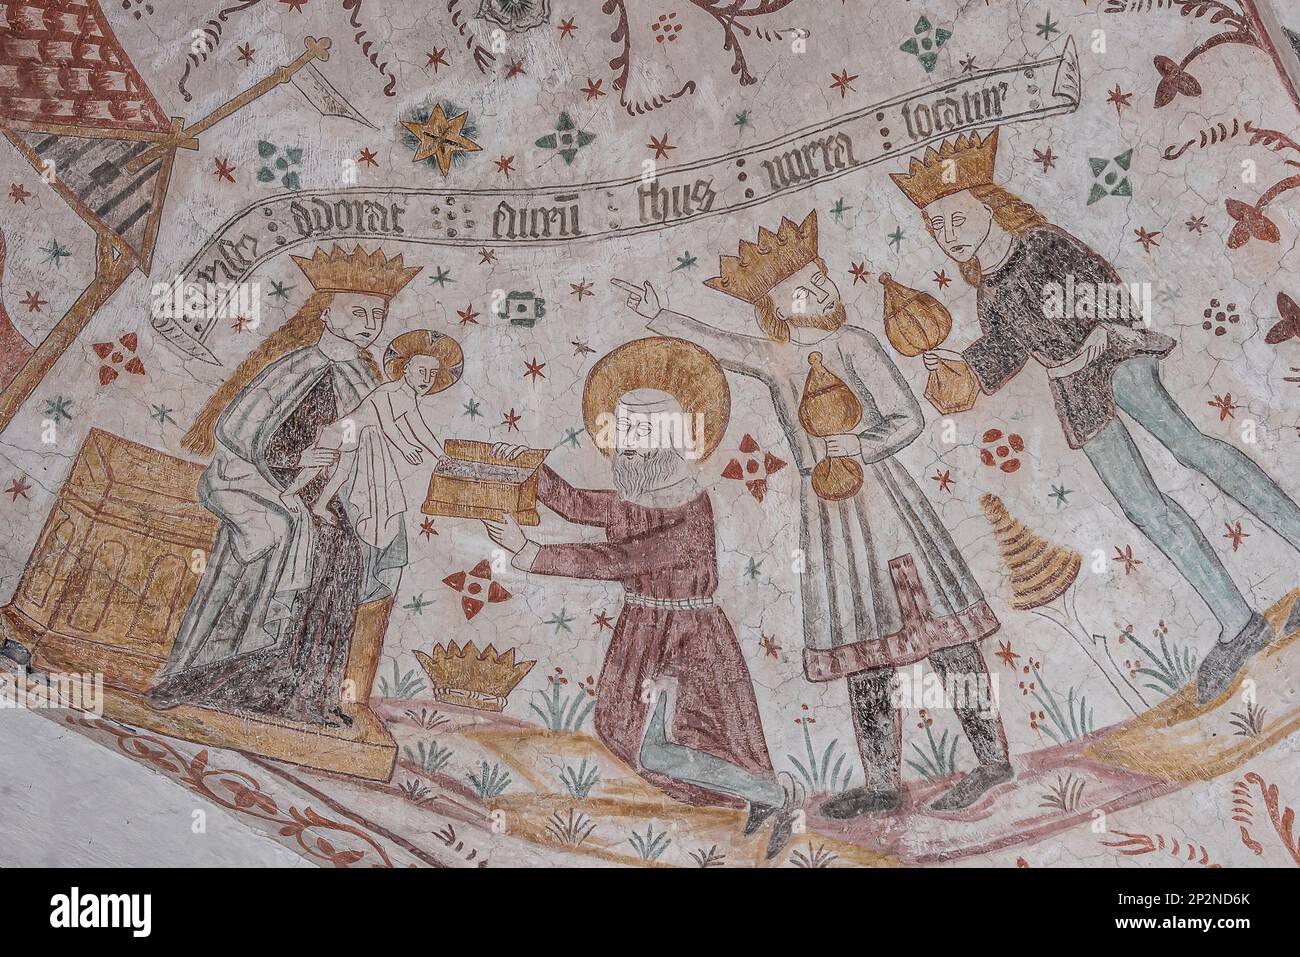 three weise men with gifts to the christ-child, ancient wall-painting in Keldby church, Denmark, October 10, 2022 Stock Photo